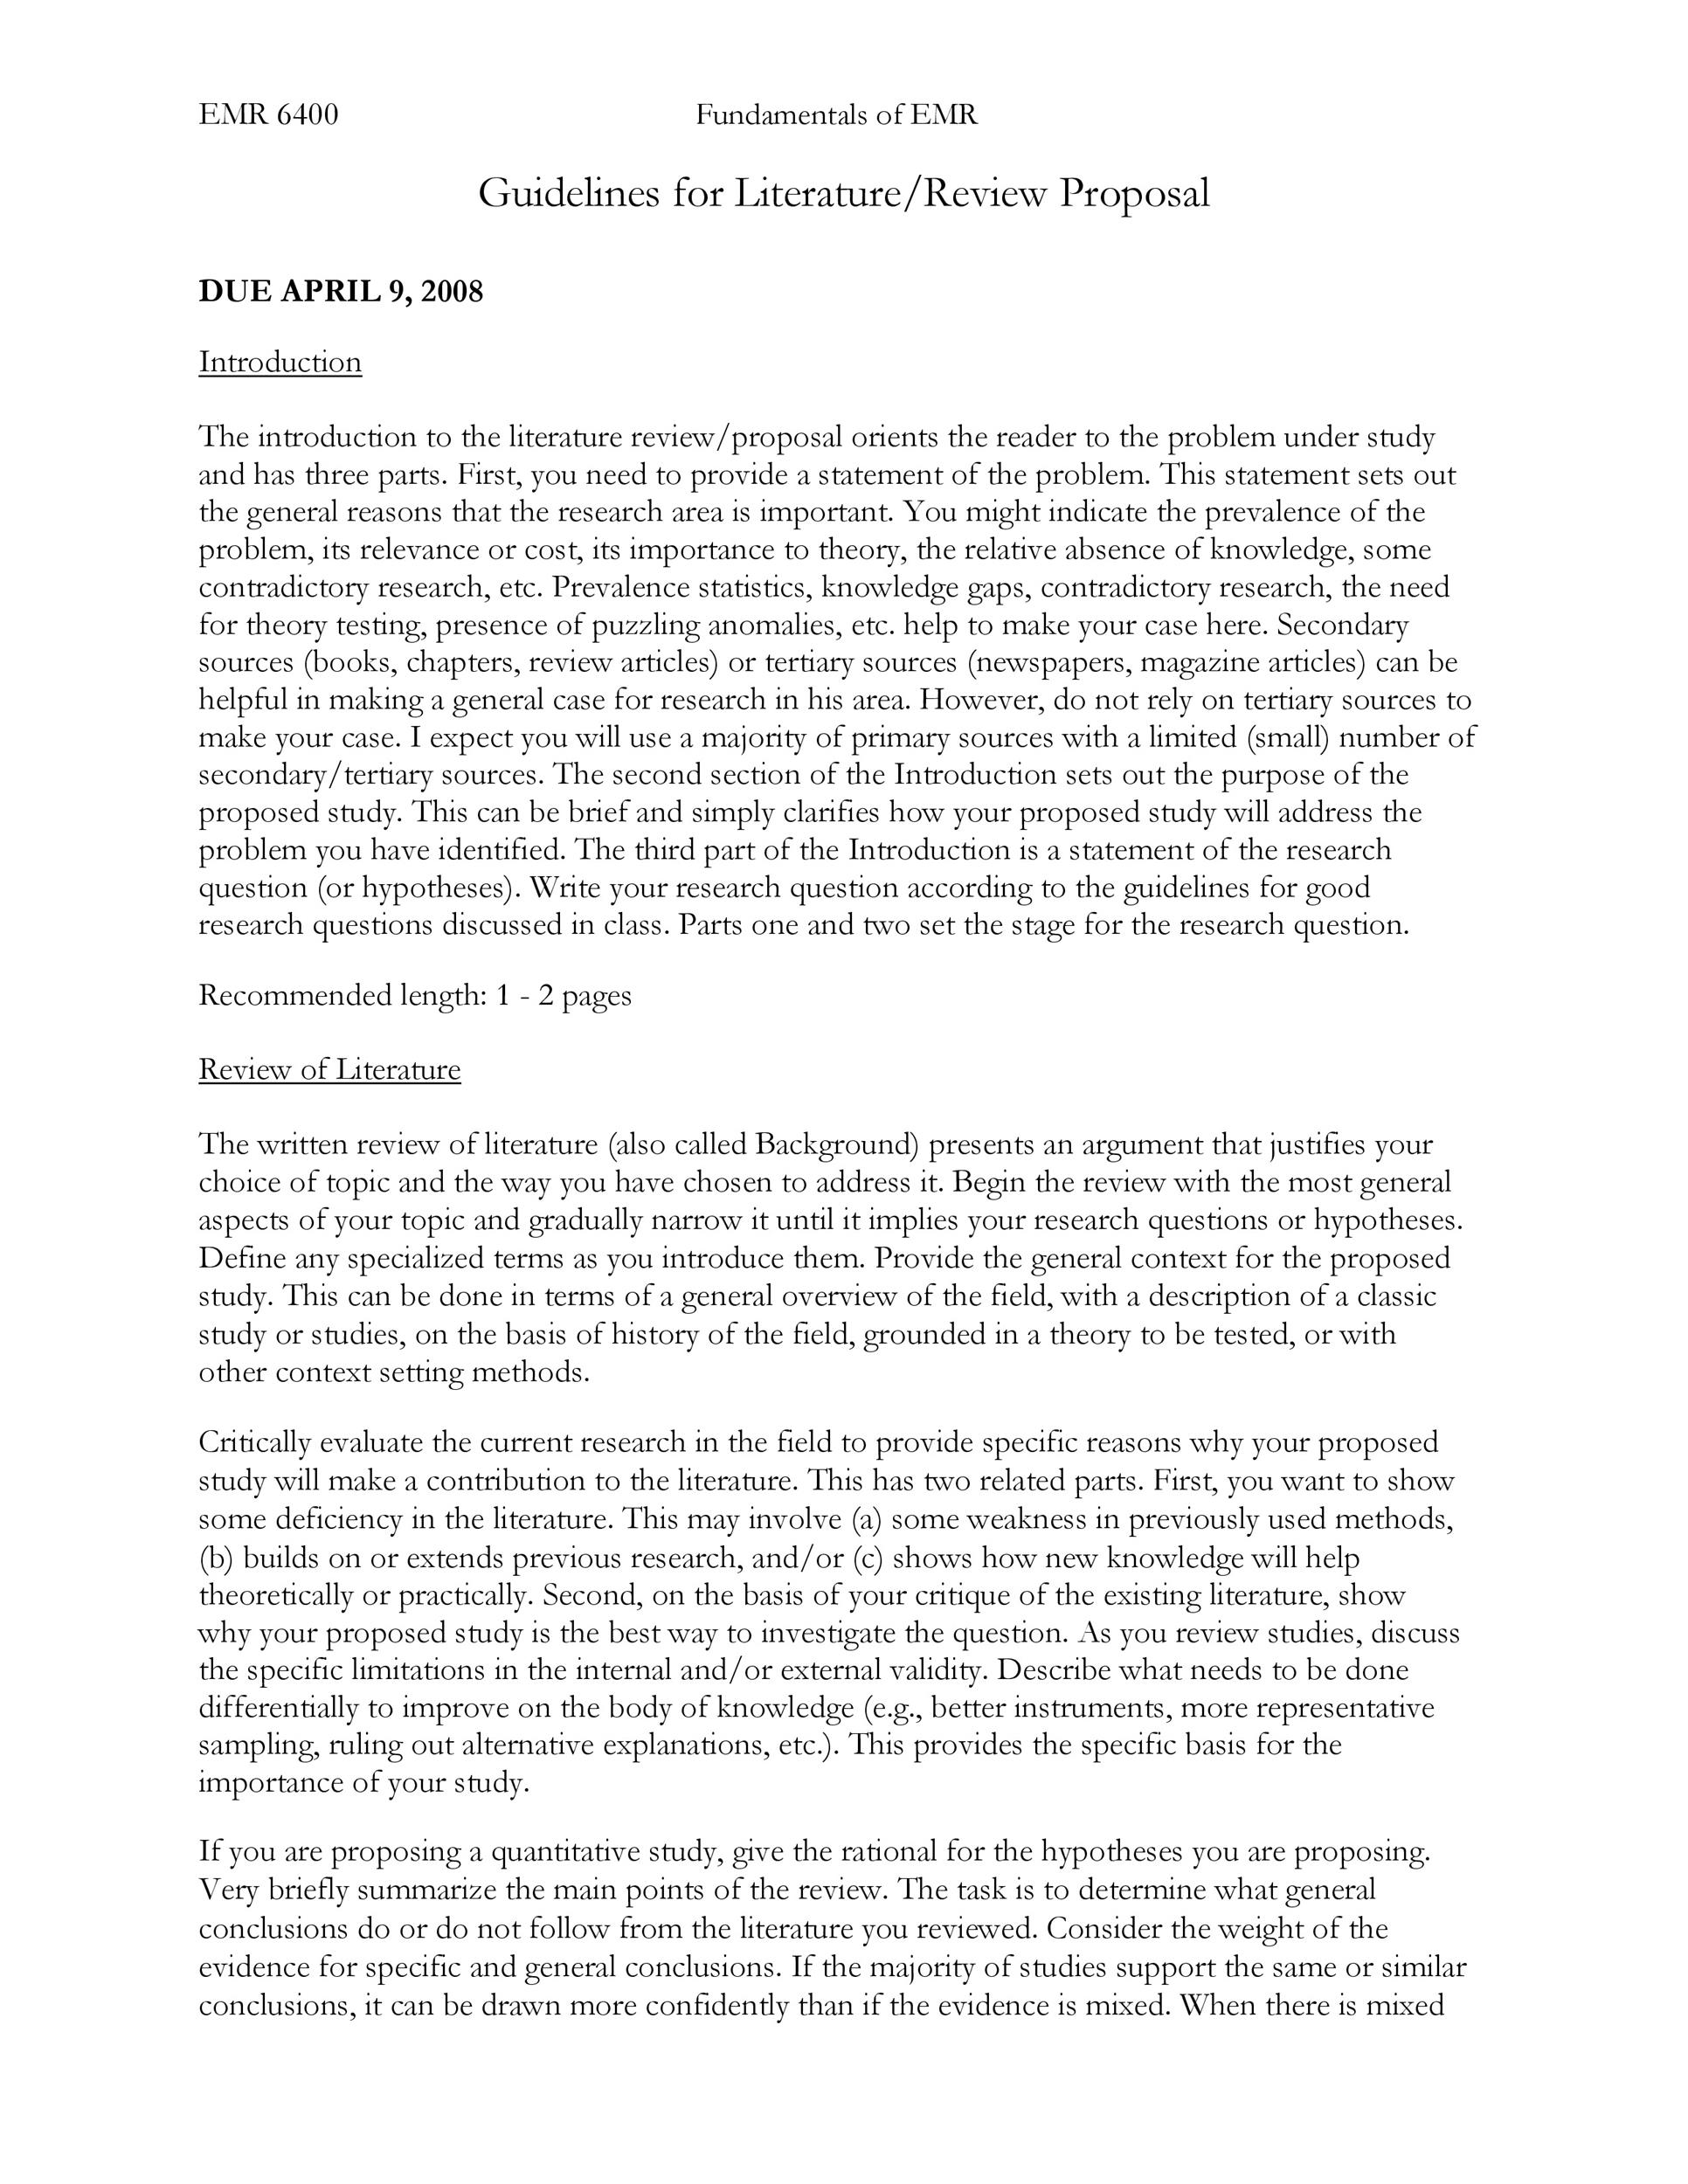 Free literature review template 11